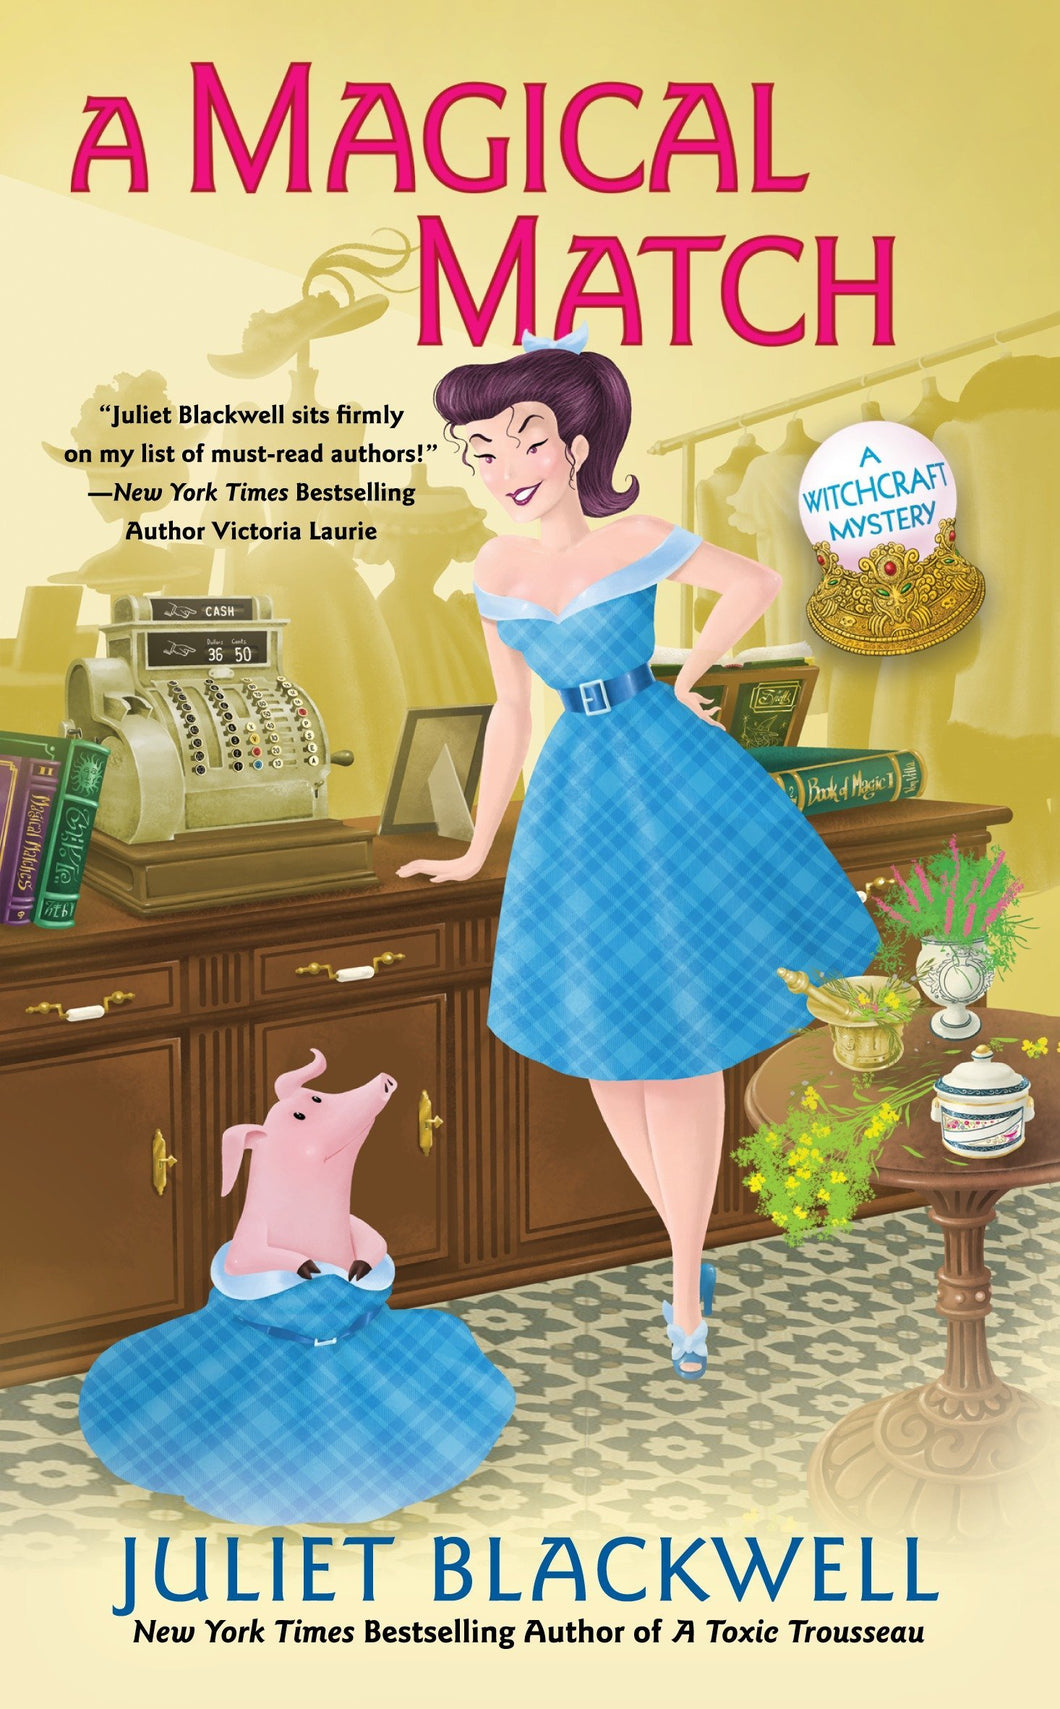 A Magical Match: A Witchcraft Mystery [Juliet Blackwell]